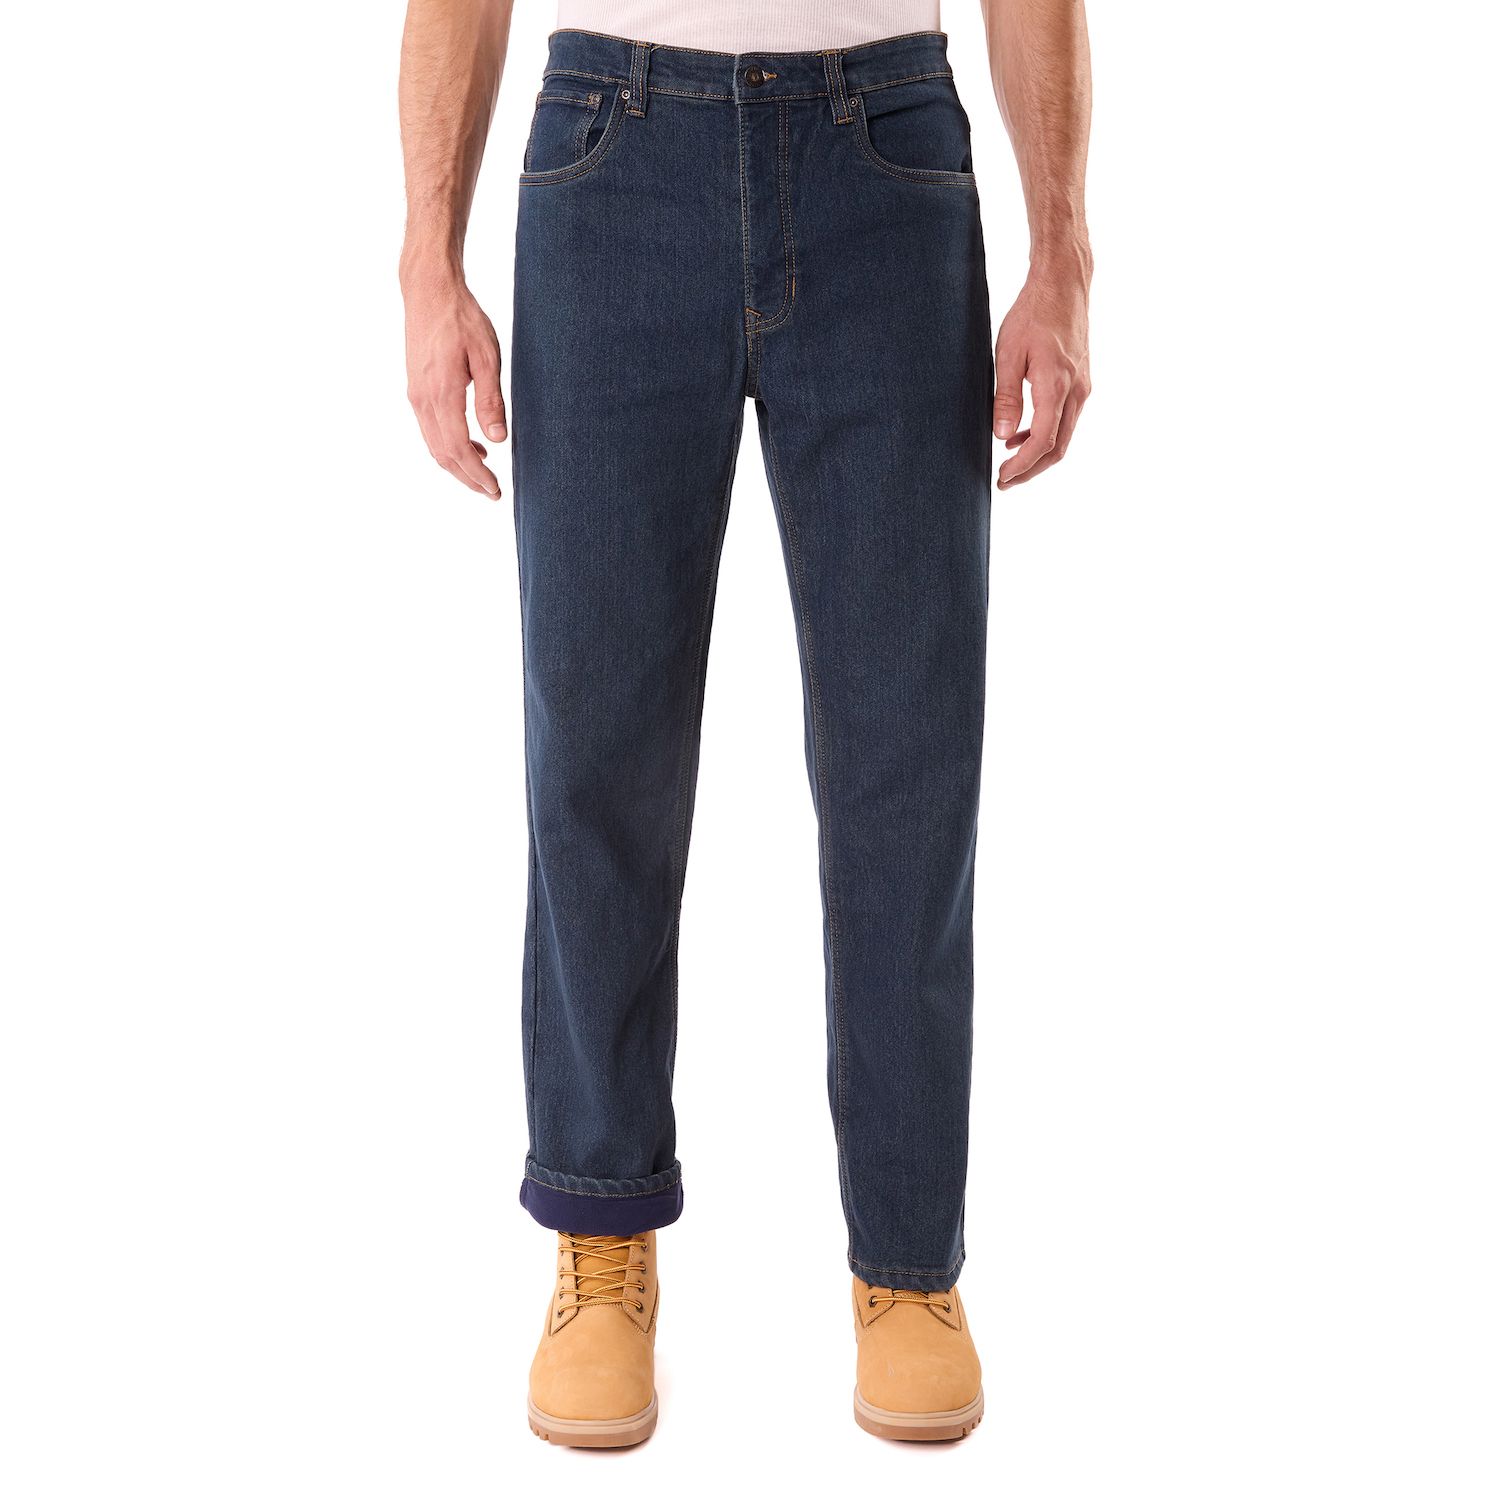 mens lined jeans